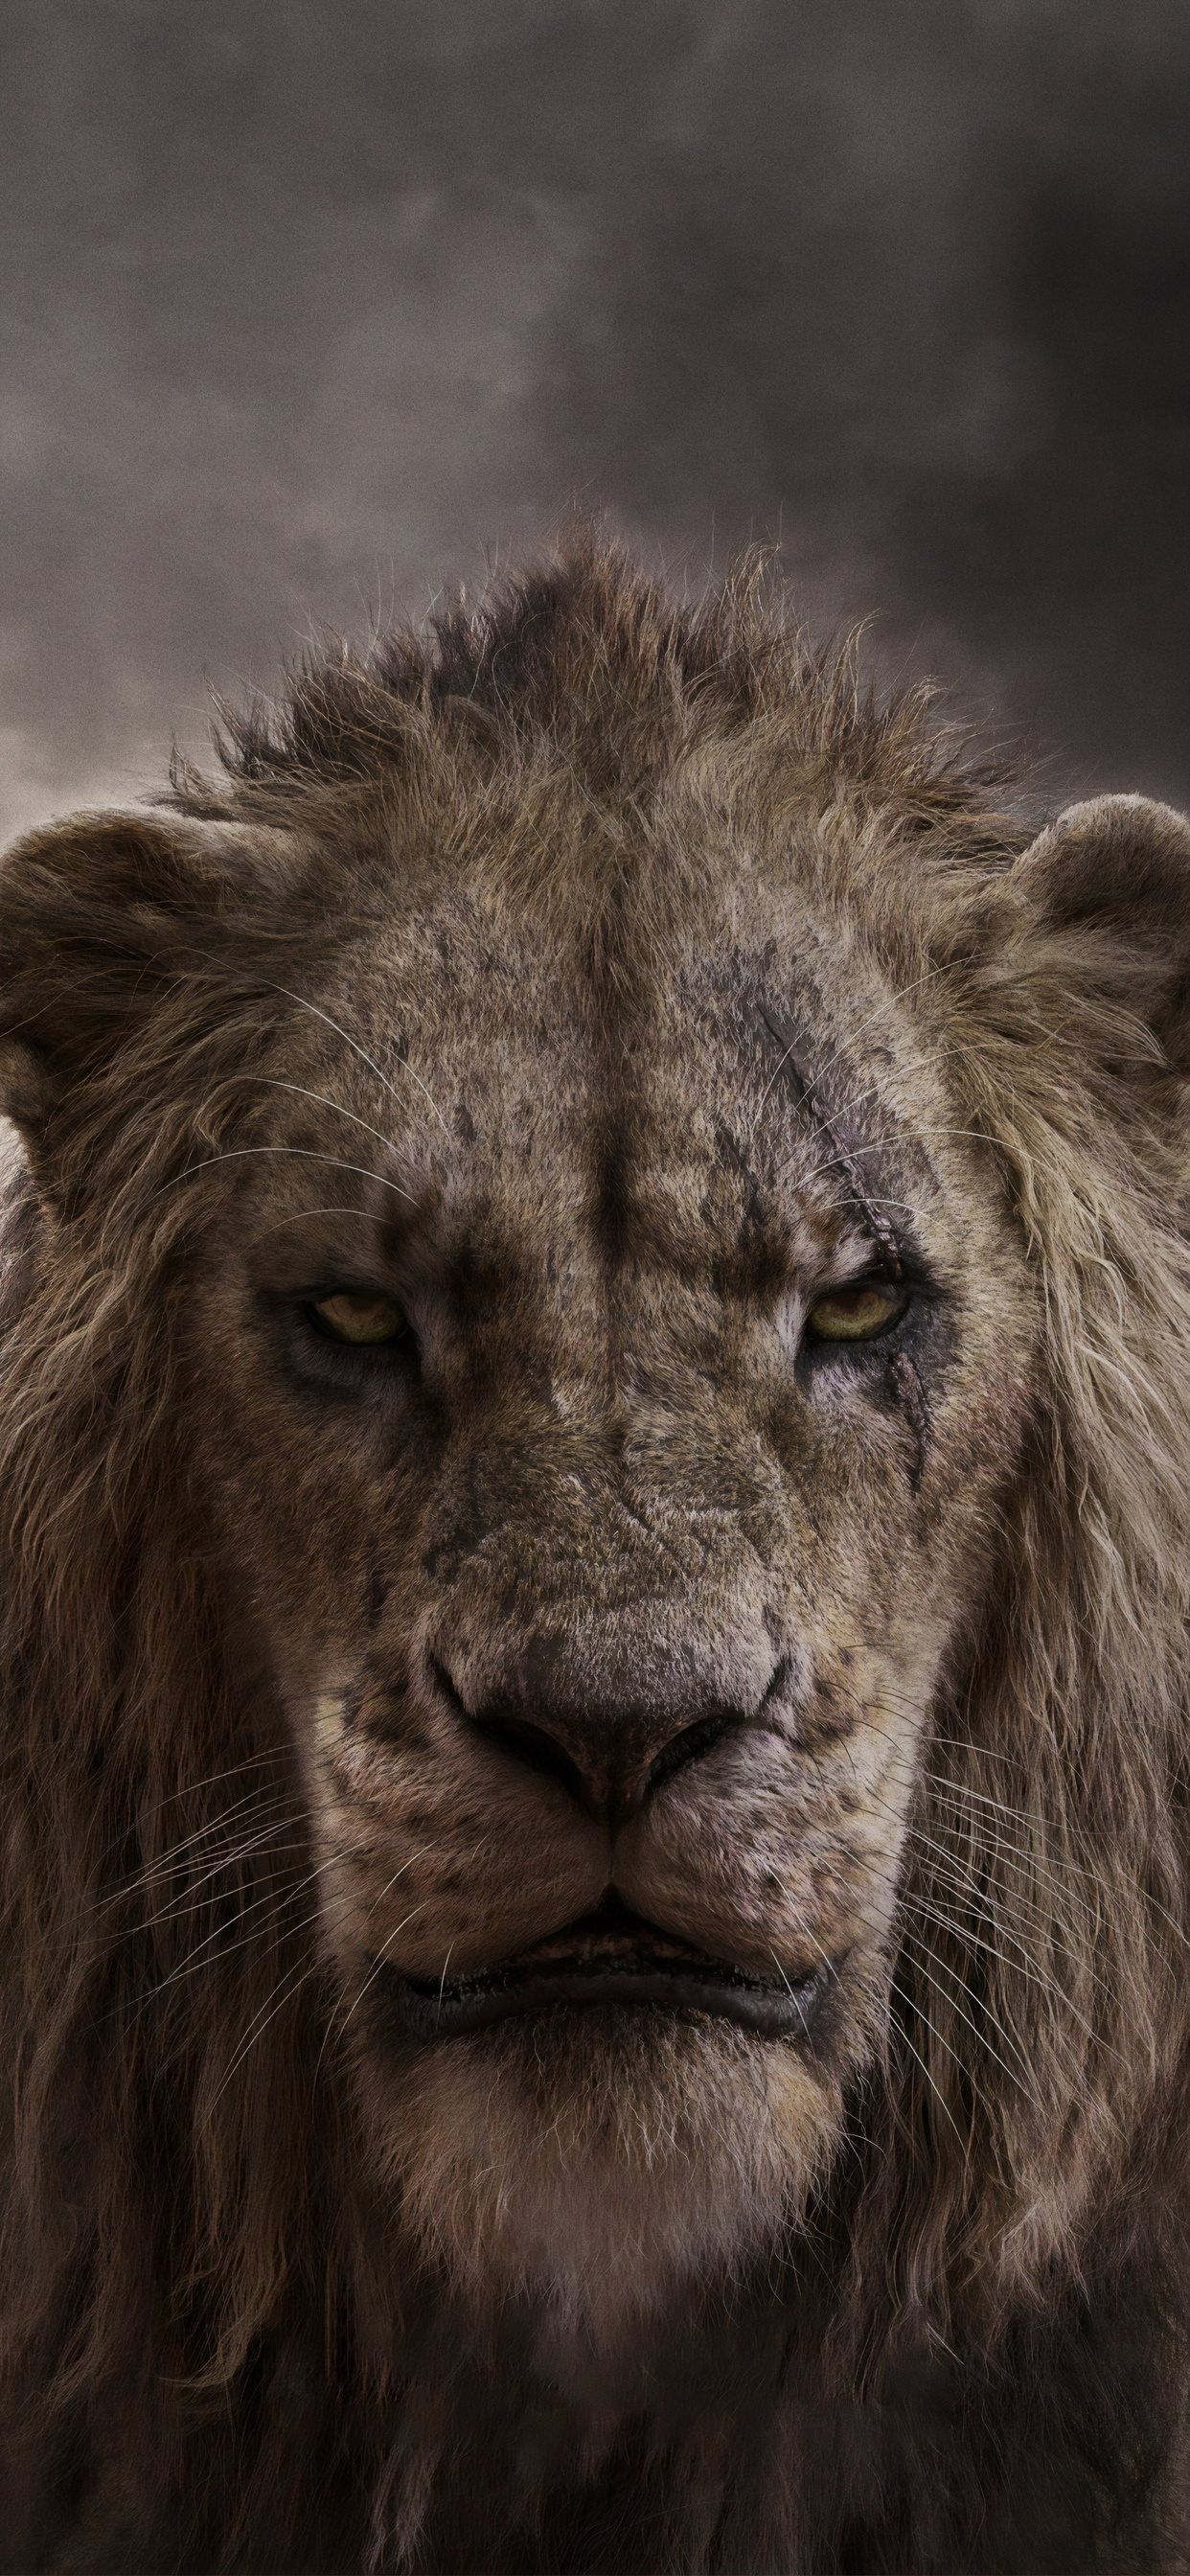 chiwetel ejiofor as scar in the lion king 2019 4k iPhone